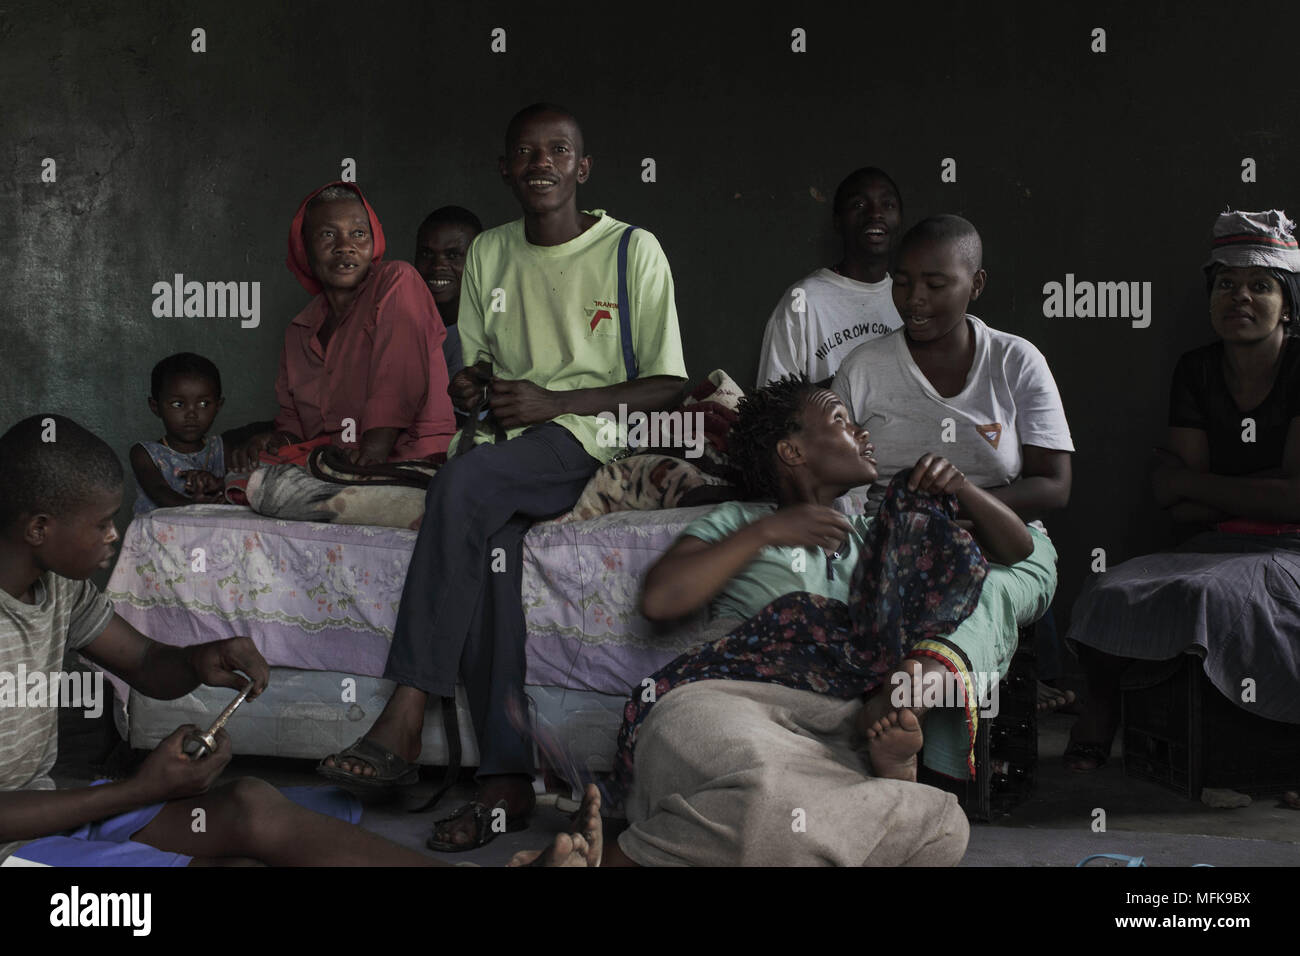 January 12, 2018 - Matatiele, Eastern Cape, South Africa - Family members, who live in the same household, sit together around a bed in the kitchen. (Credit Image: © Stefan Kleinowitz via ZUMA Wire) Stock Photo